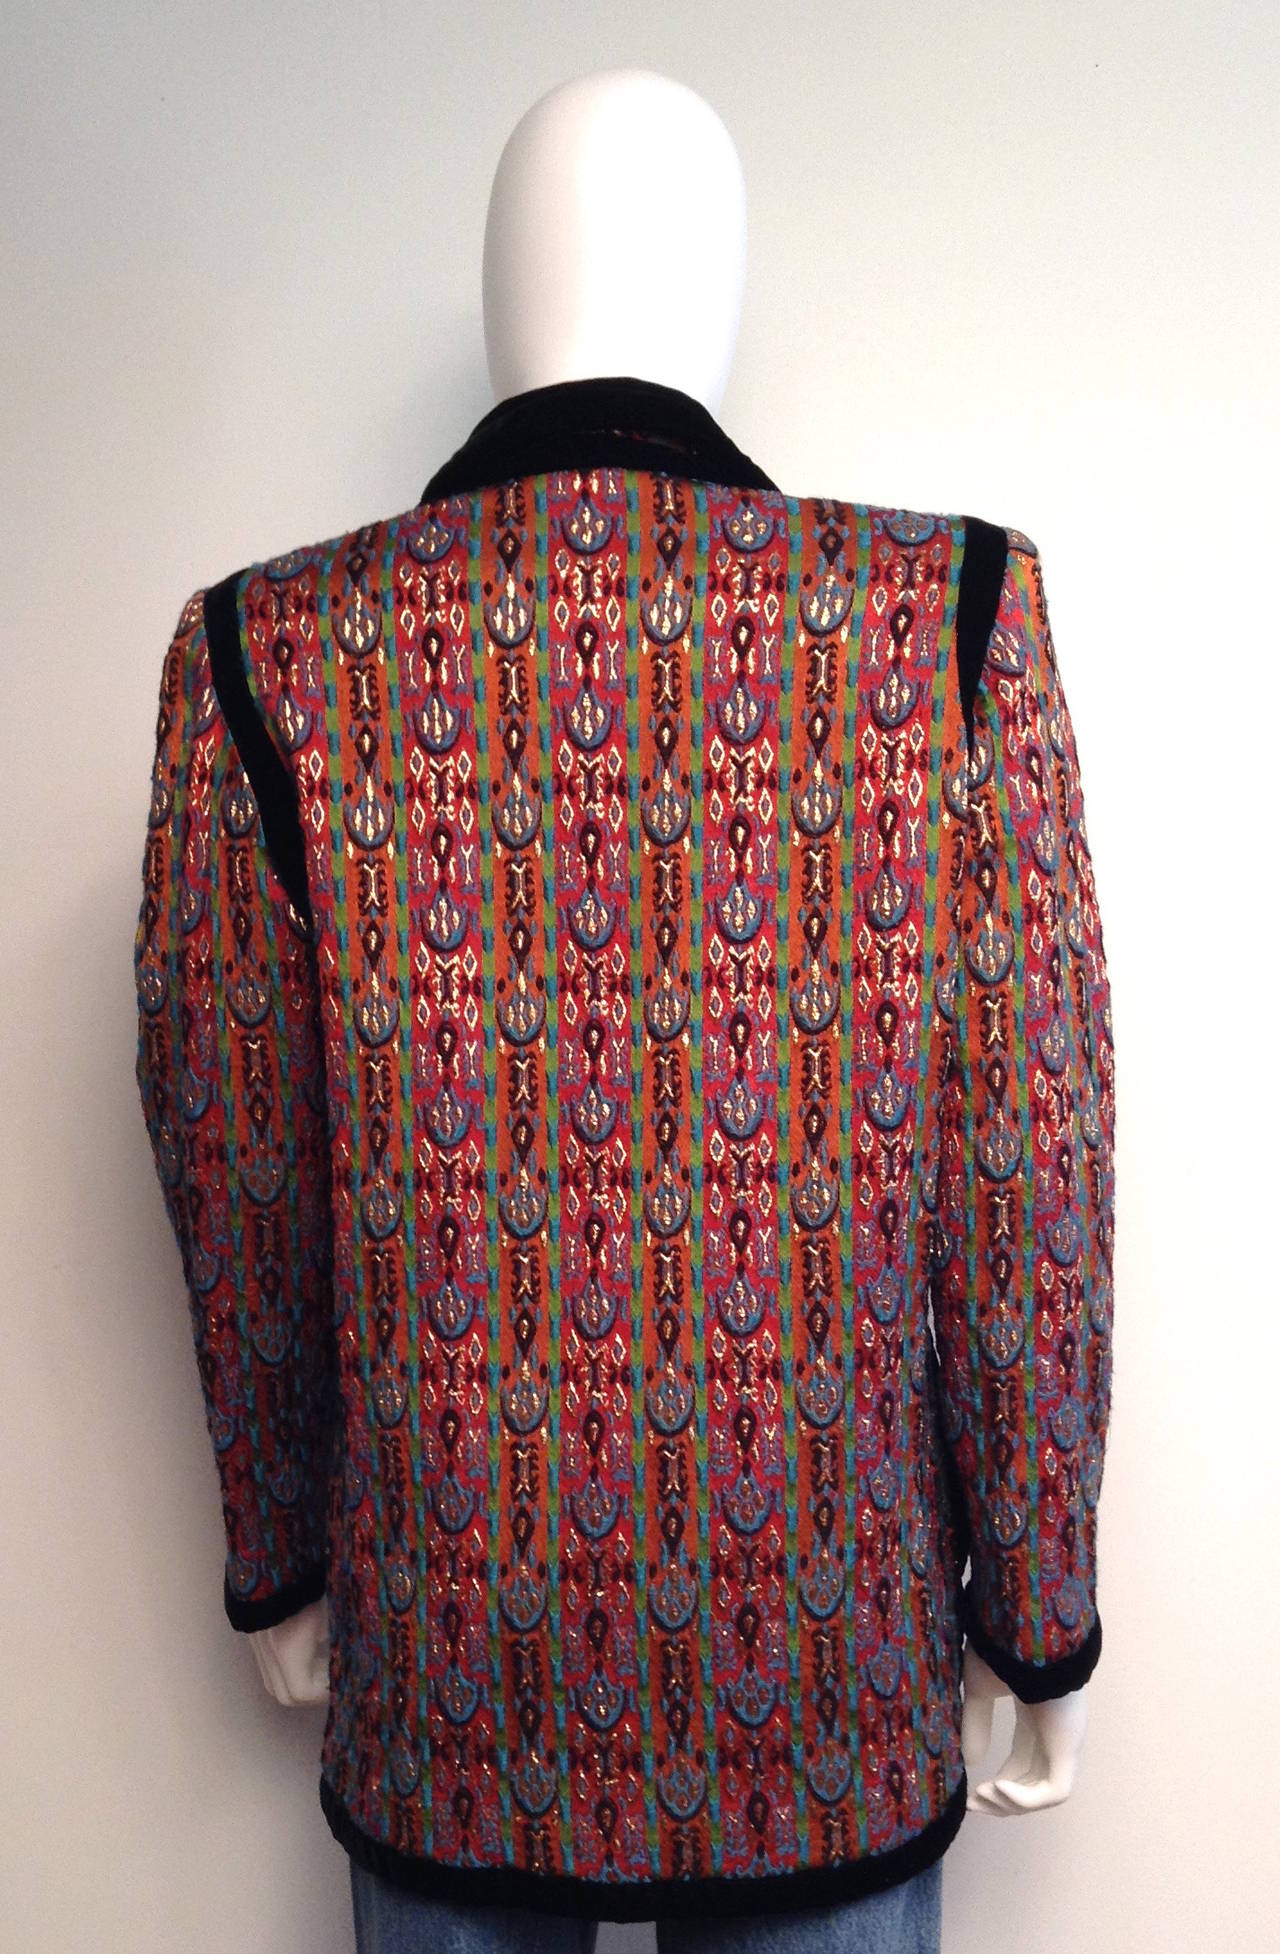 Multi color and lurex threads make up this technicolour dream coat. Trimmed in black velvet.

Measurements:
bust 40